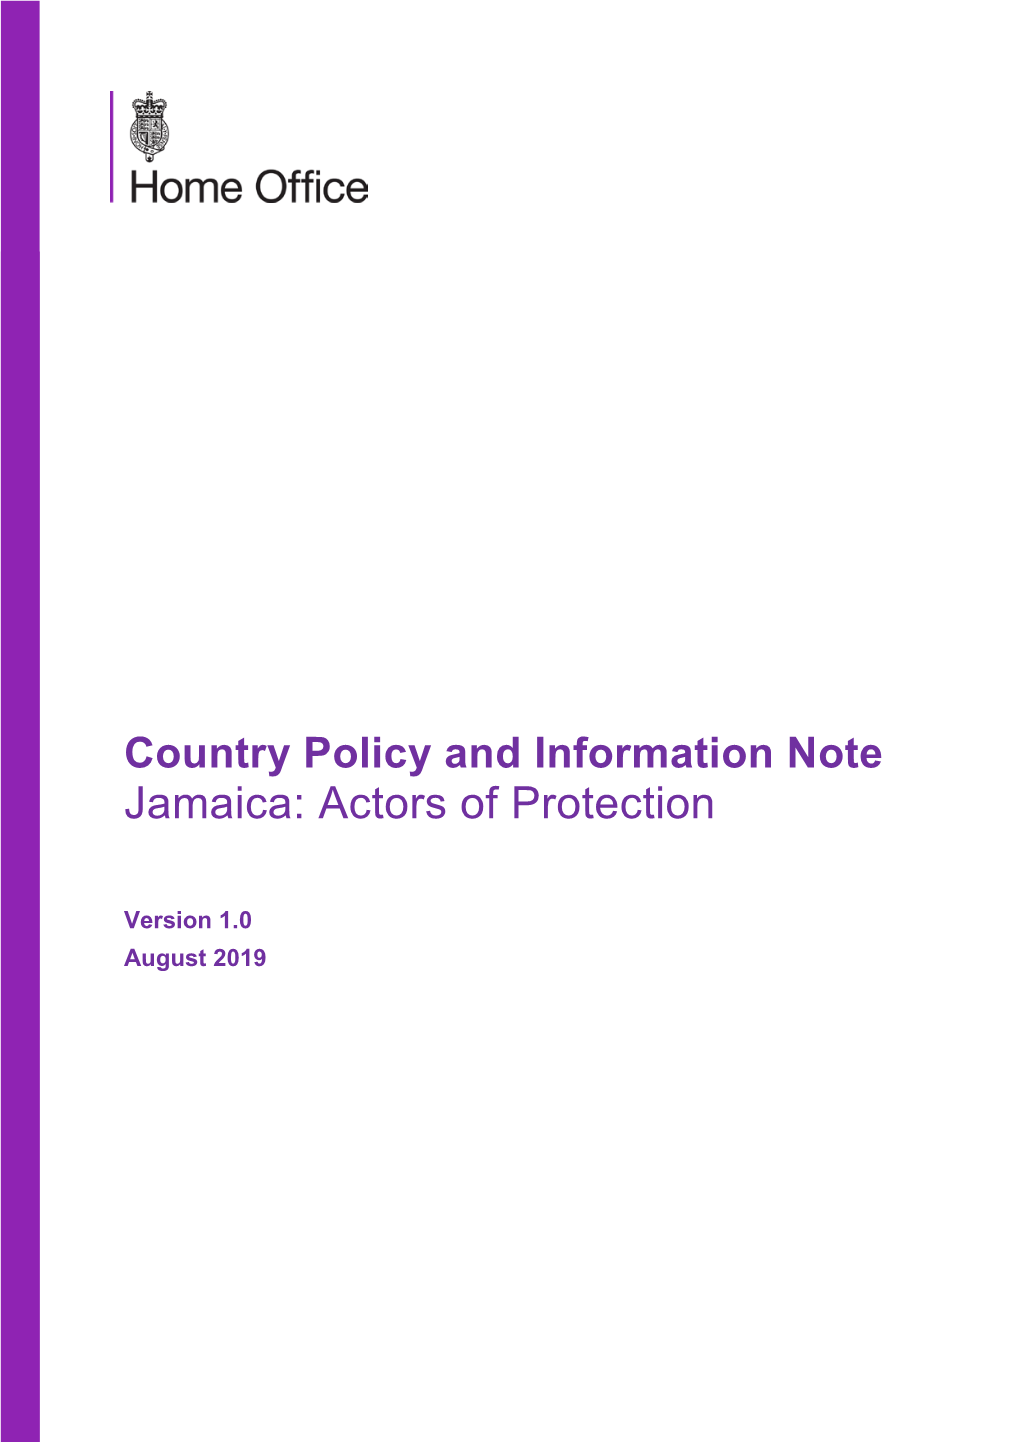 Jamaica: Actors of Protection